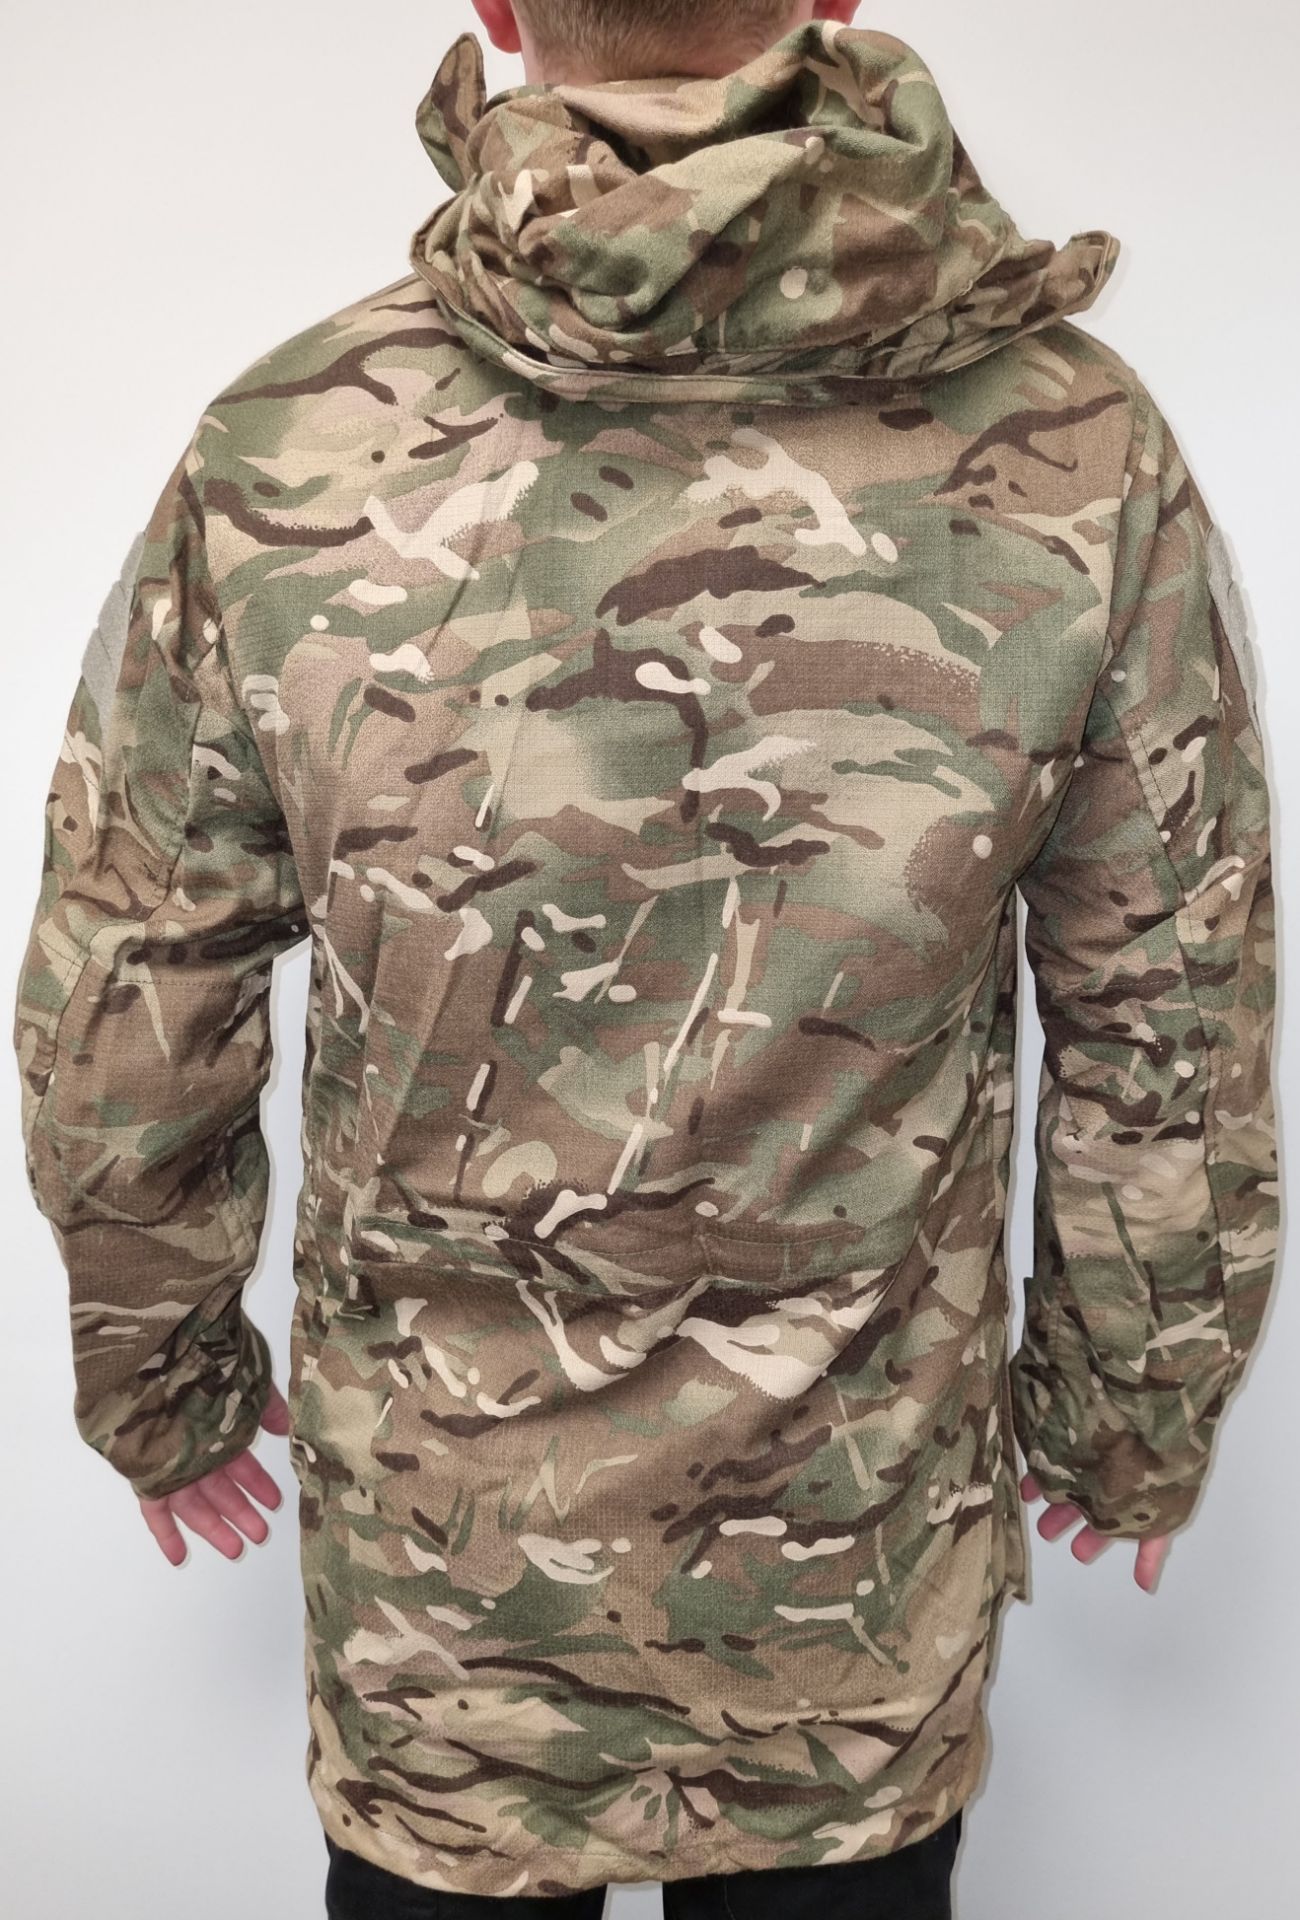 50x British Army MTP windproof smocks - mixed grades and sizes - Image 3 of 13